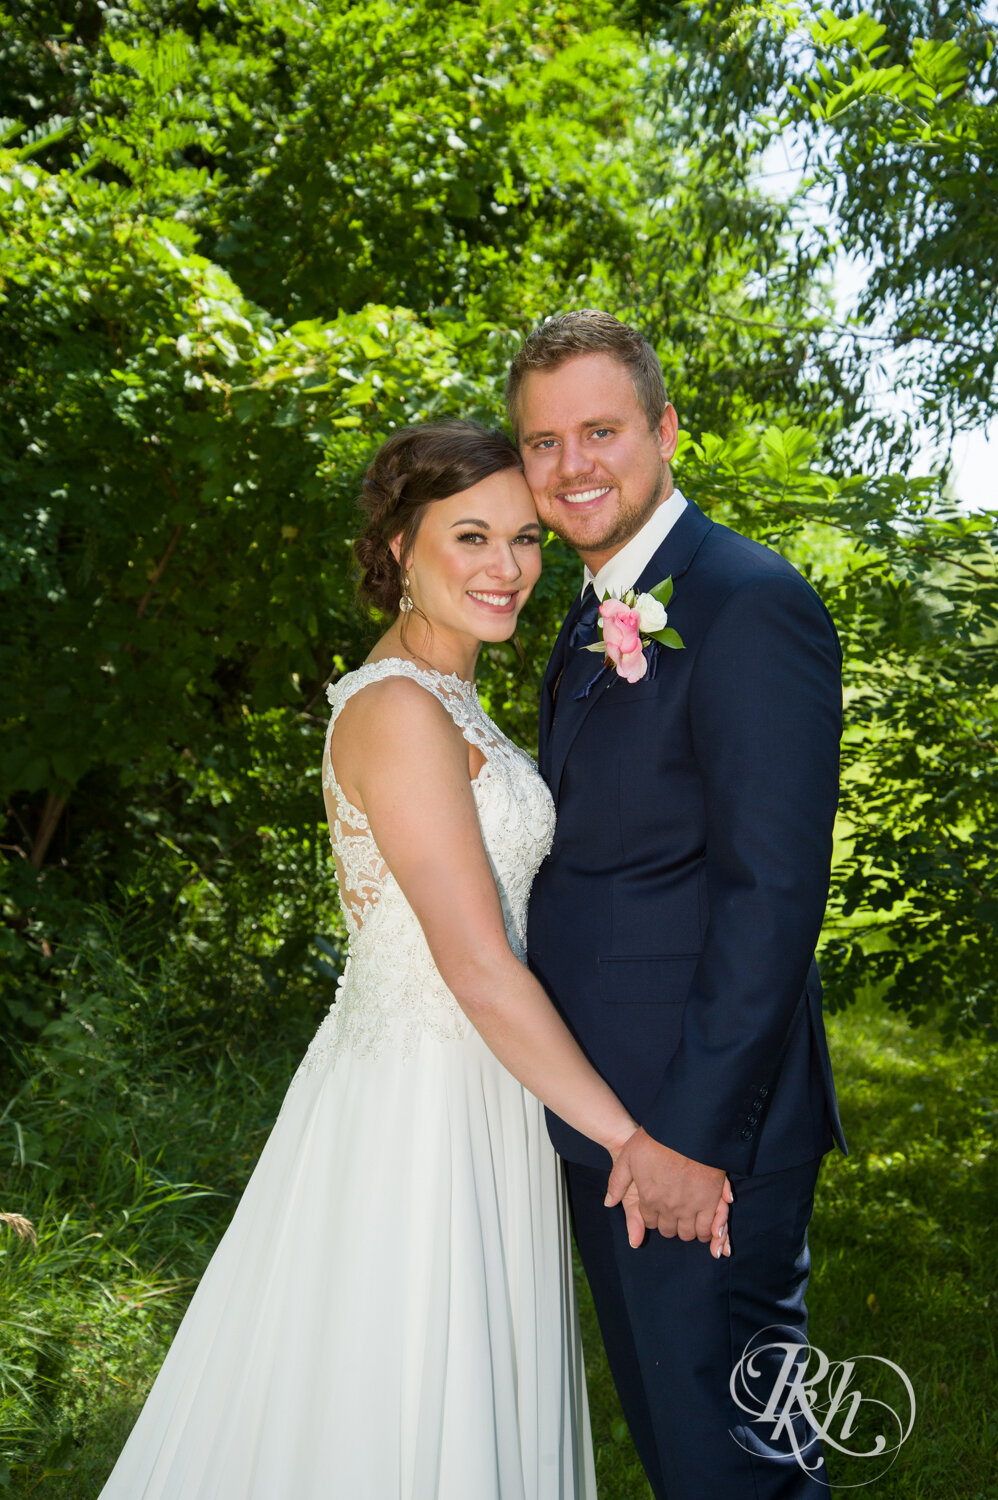 Bride and groom smile between trees on sunny wedding day at Crown Room in Rogers, Minnesota.